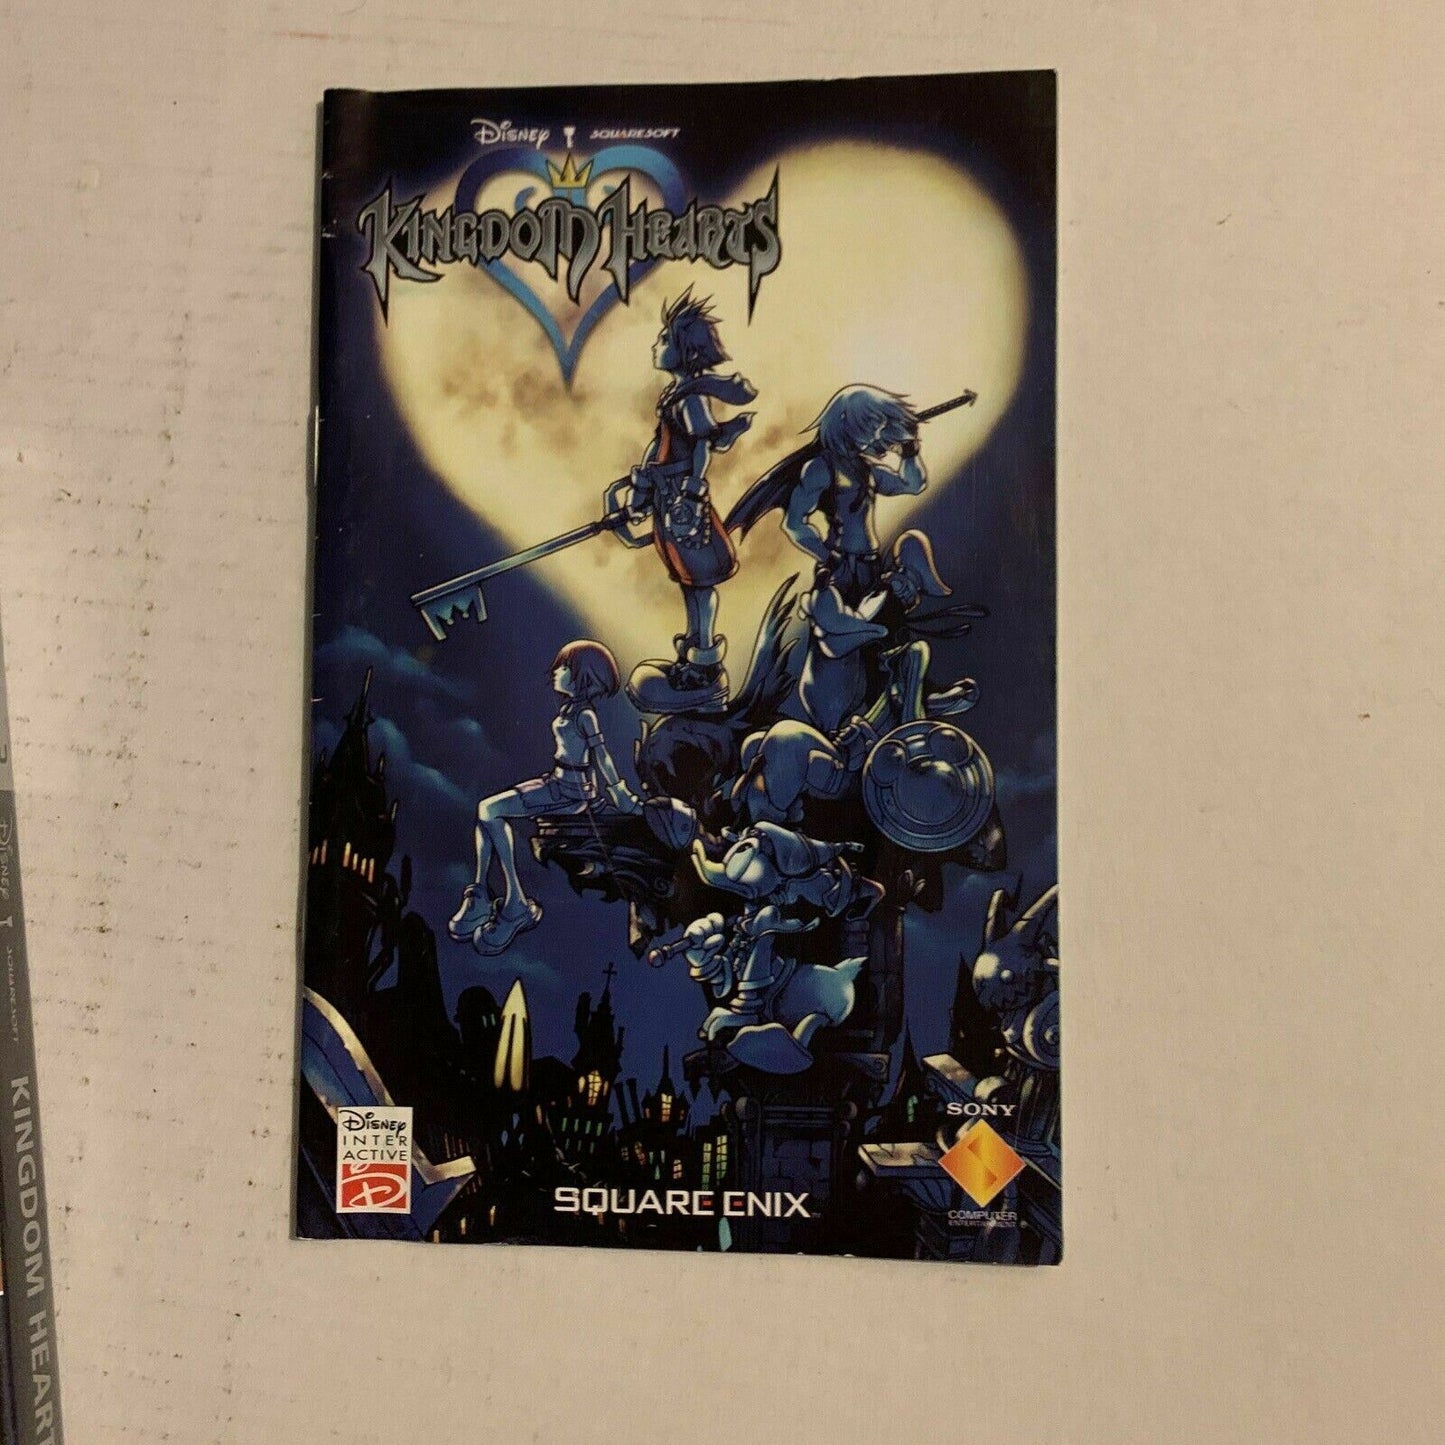 Kingdom Hearts - Platinum Sony PS2 PAL Game with Manual